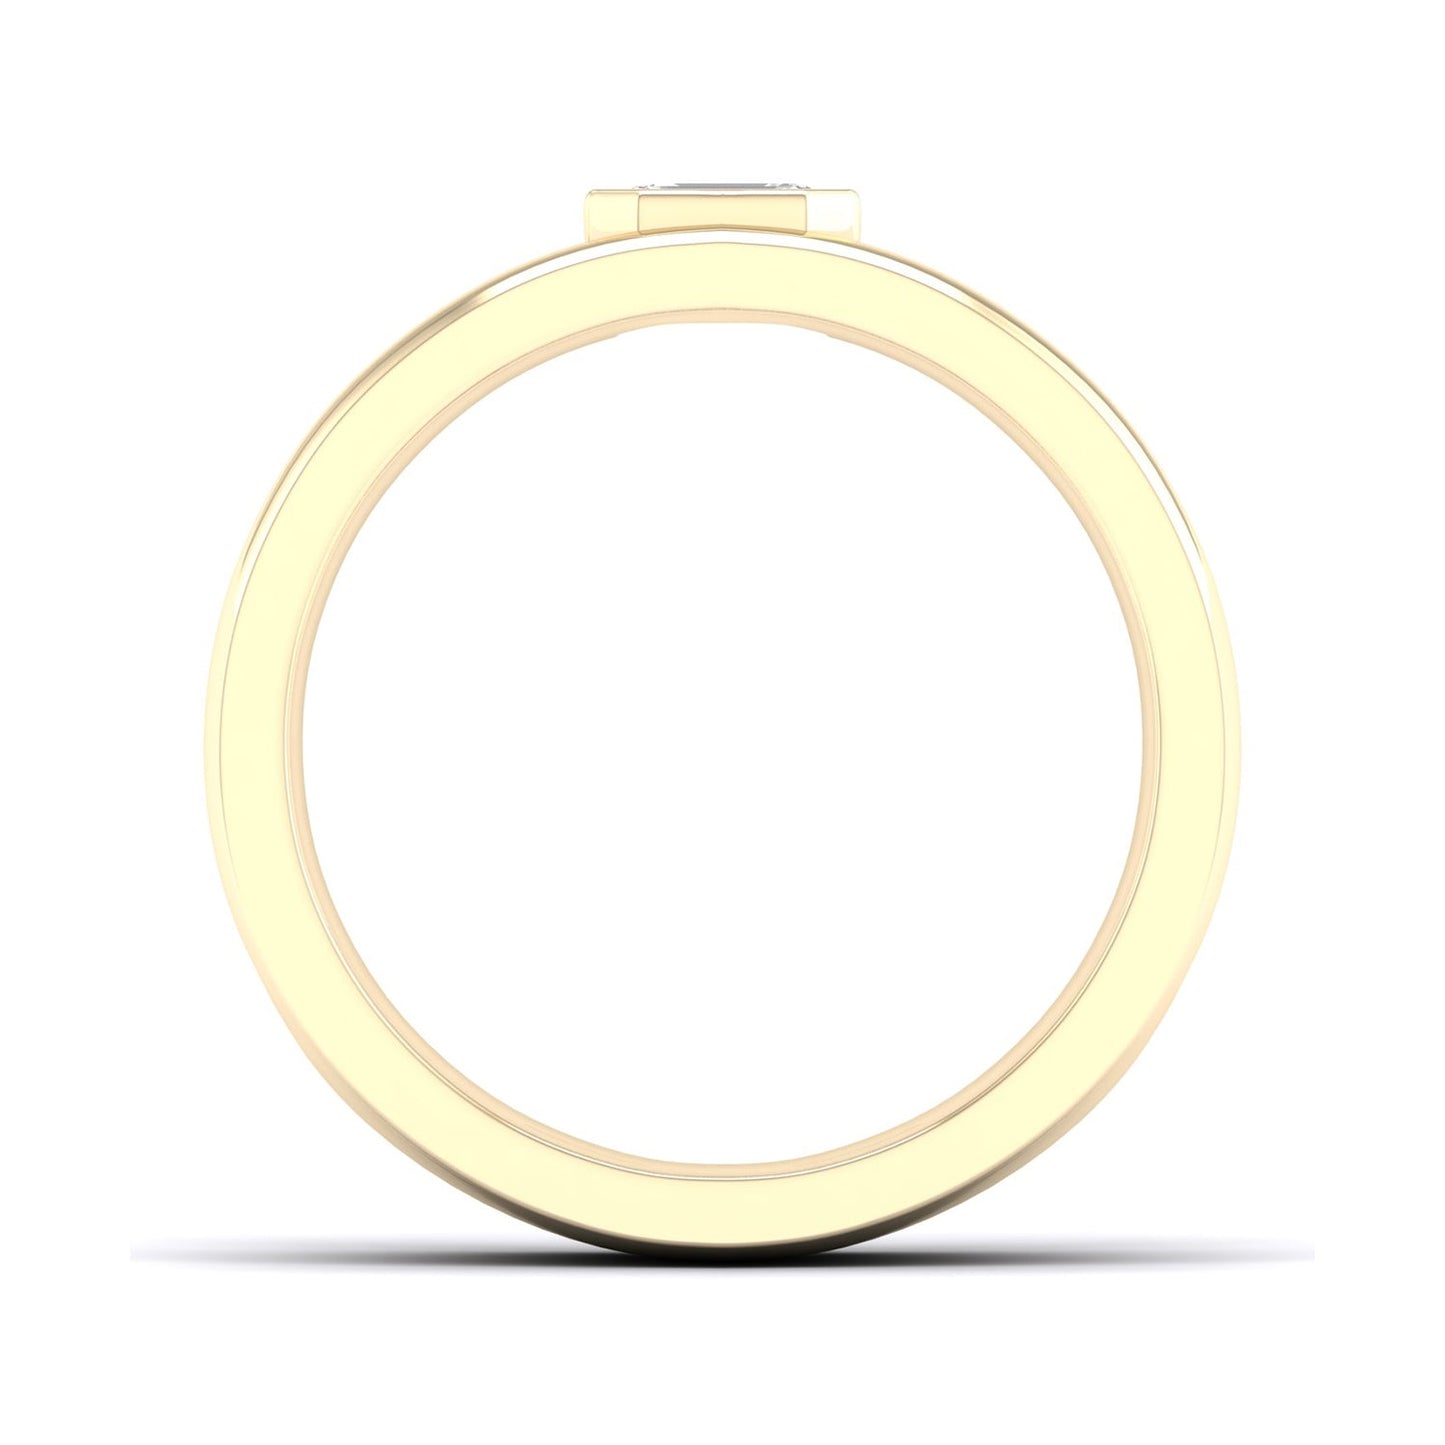 Essential 4-Pronged Round Ring_Product Angle_1/4 Ct. - 3